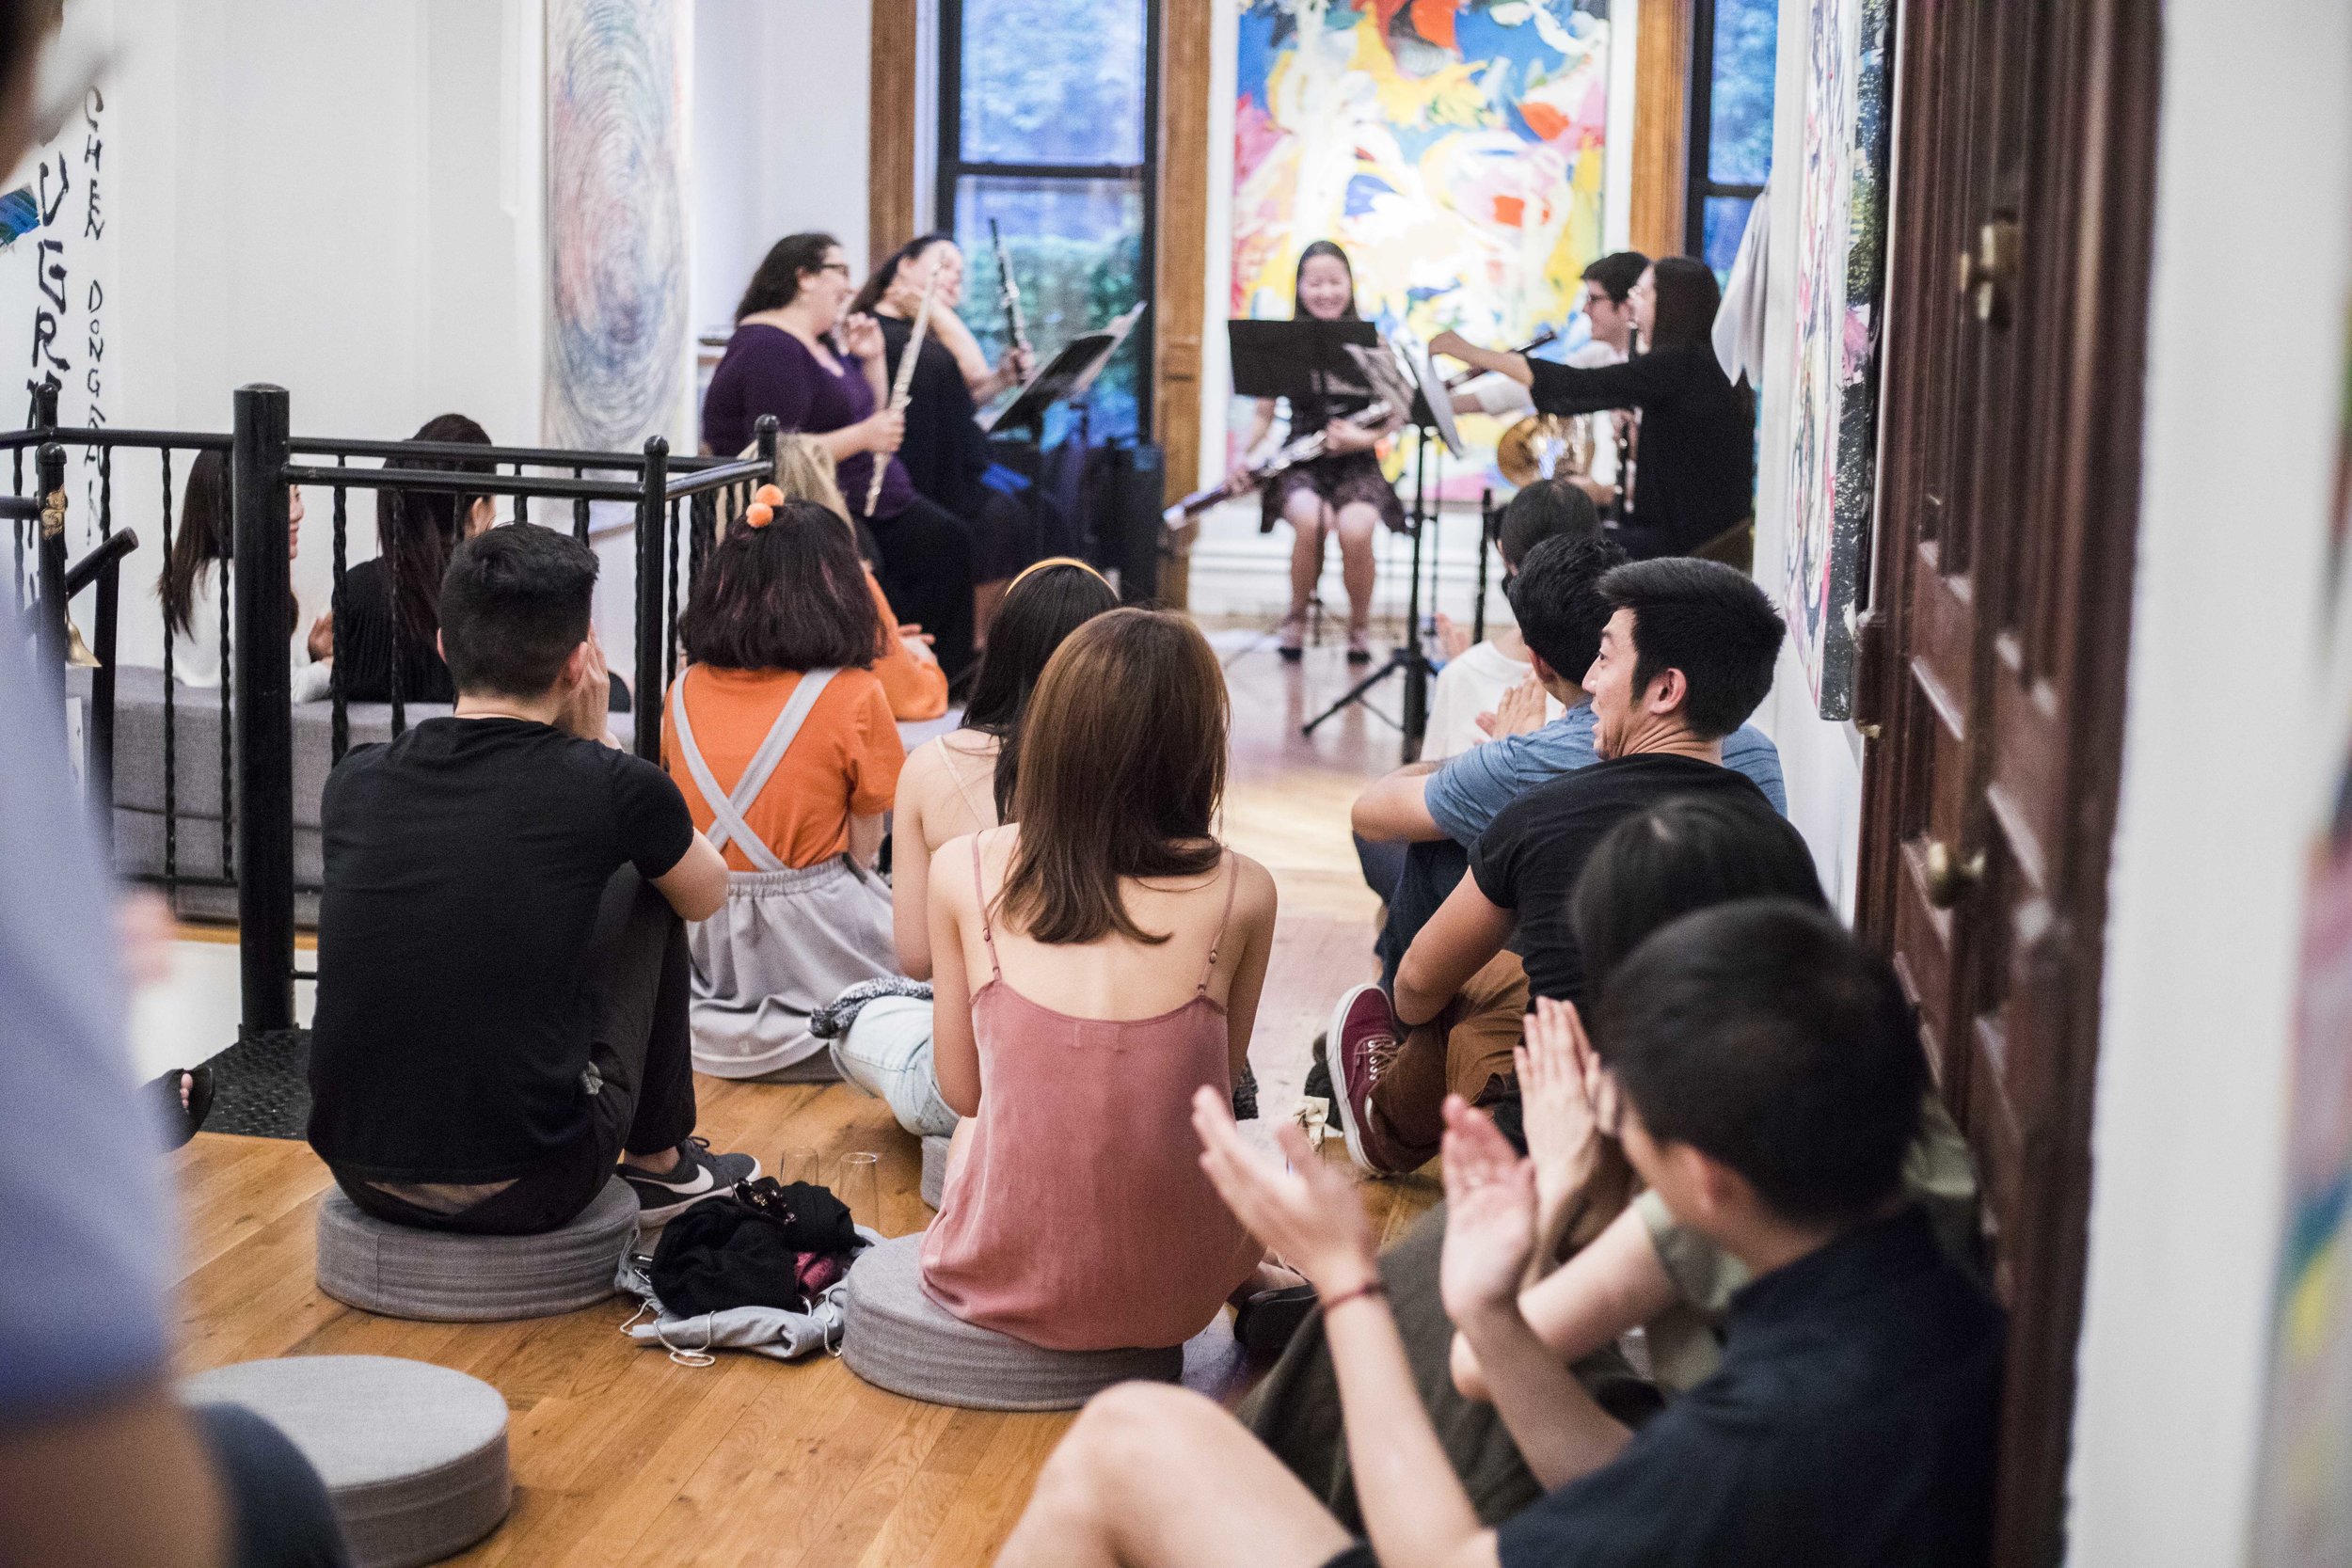   Nevermore - Music Concert  with The Lumisade Quintet at Fou Gallery. Photograph by Nadia Peichao Lin. 昨夜星辰昨夜风 - 木管五重奏音乐会@否画廊，摄影：林沛超. 